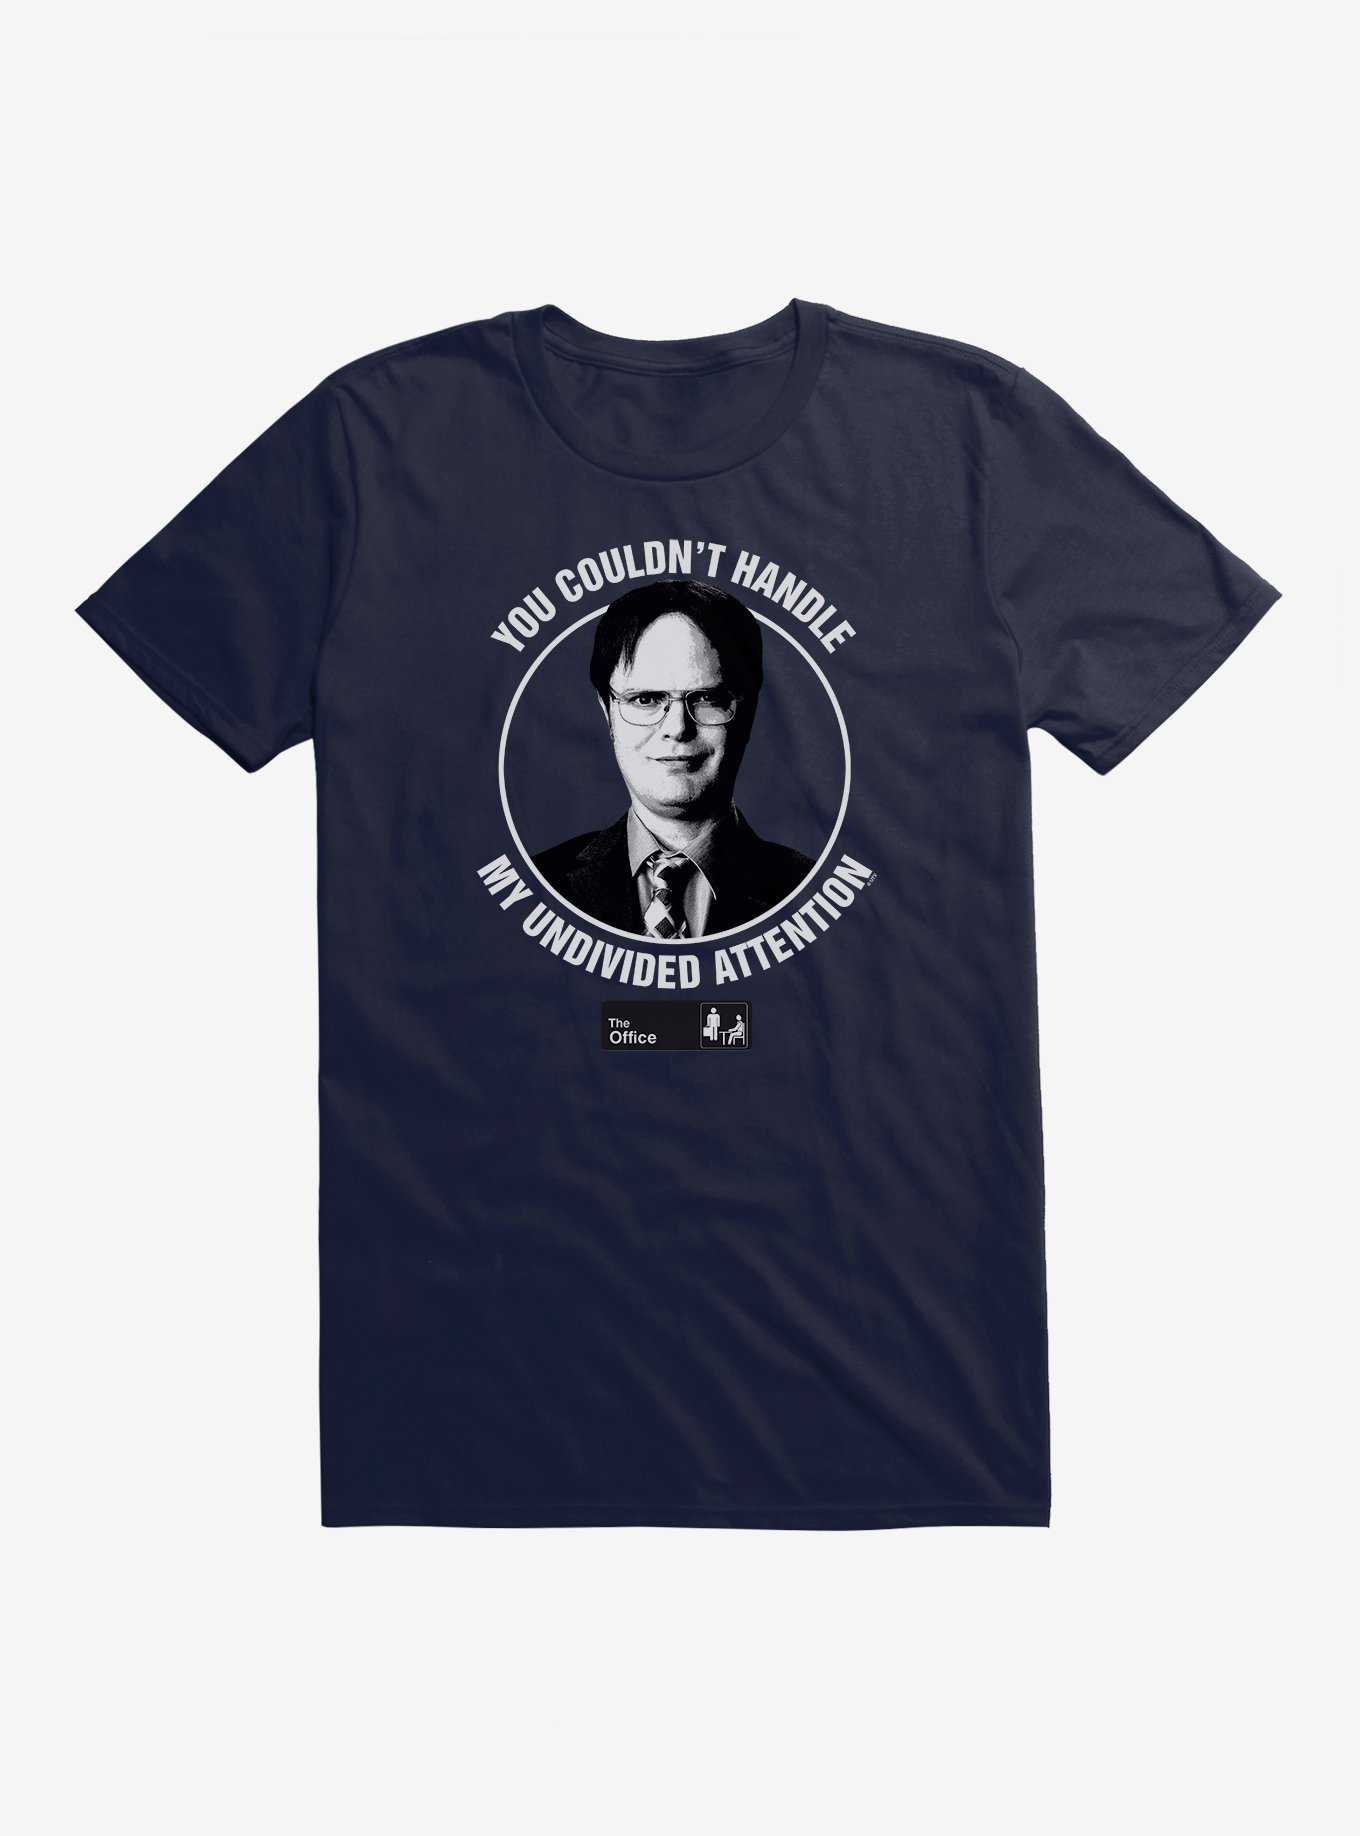 OFFICIAL The Office Merchandise & T-Shirts